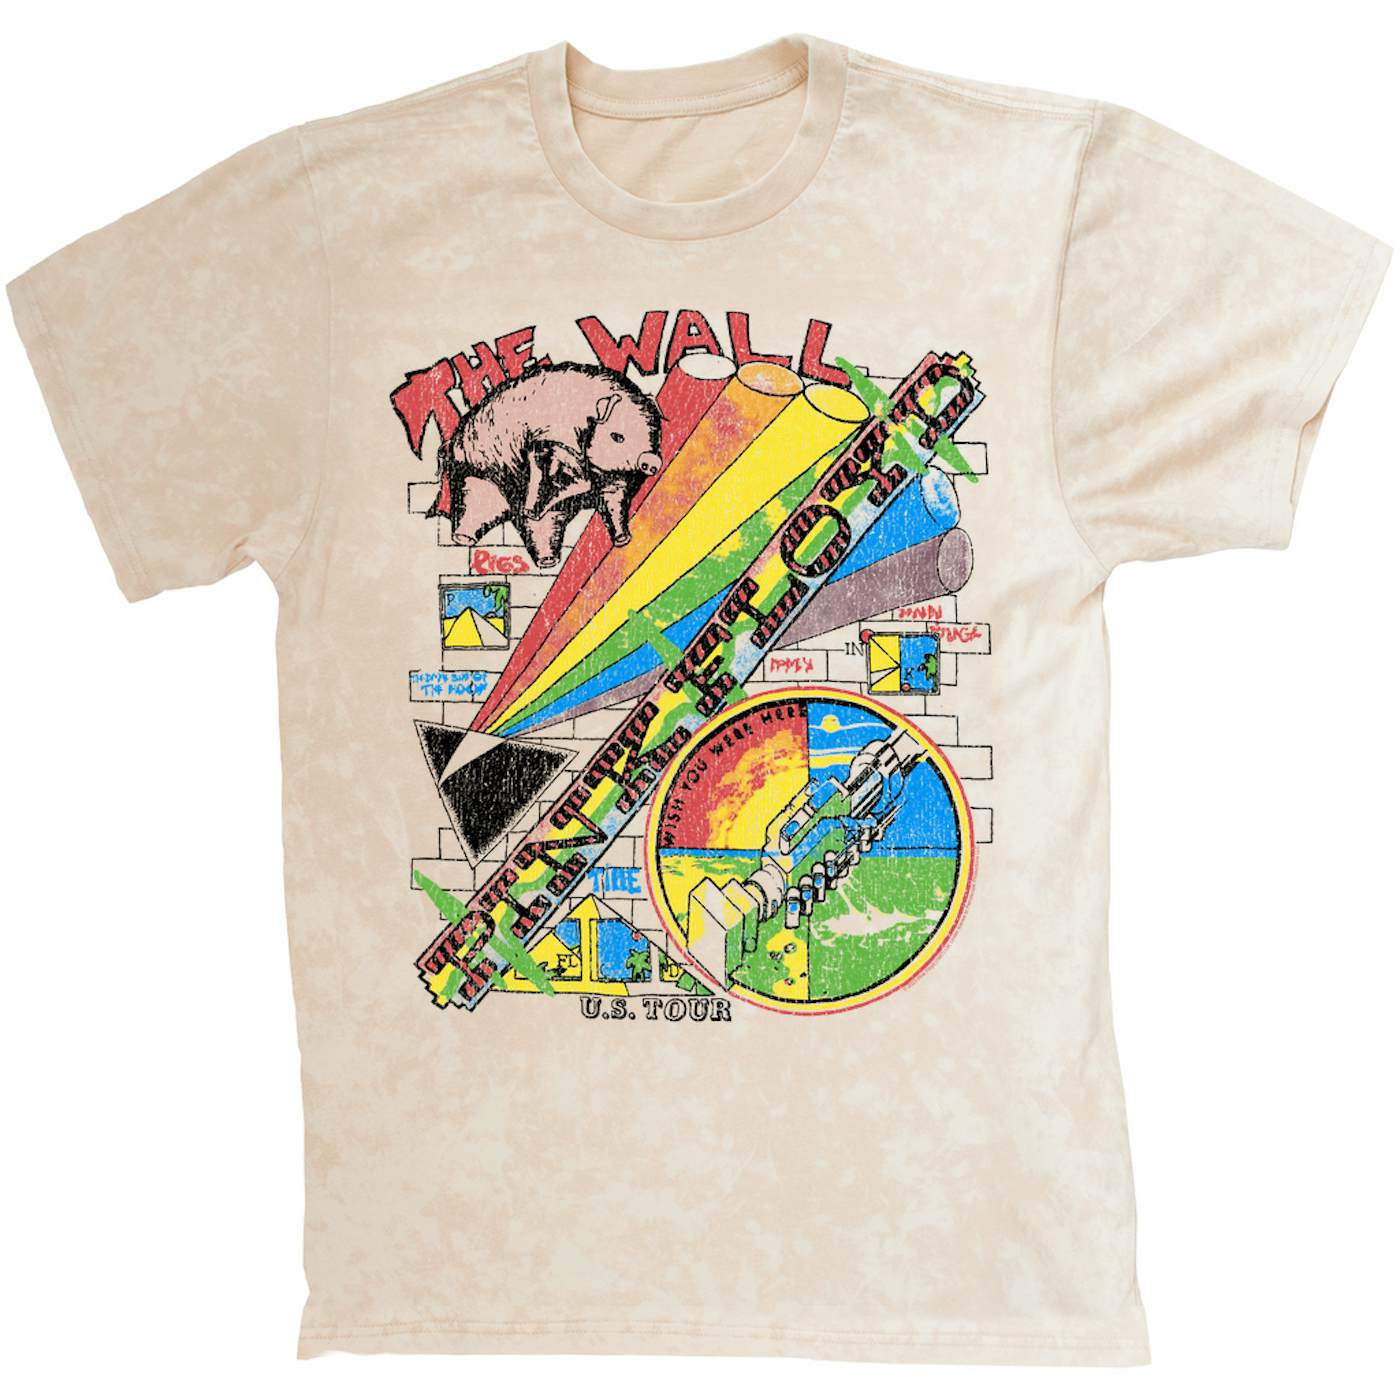 T-shirt Tour Distressed Pink Mineral Wash The Floyd Sketch Wall Pink Shirt Floyd | U.S.